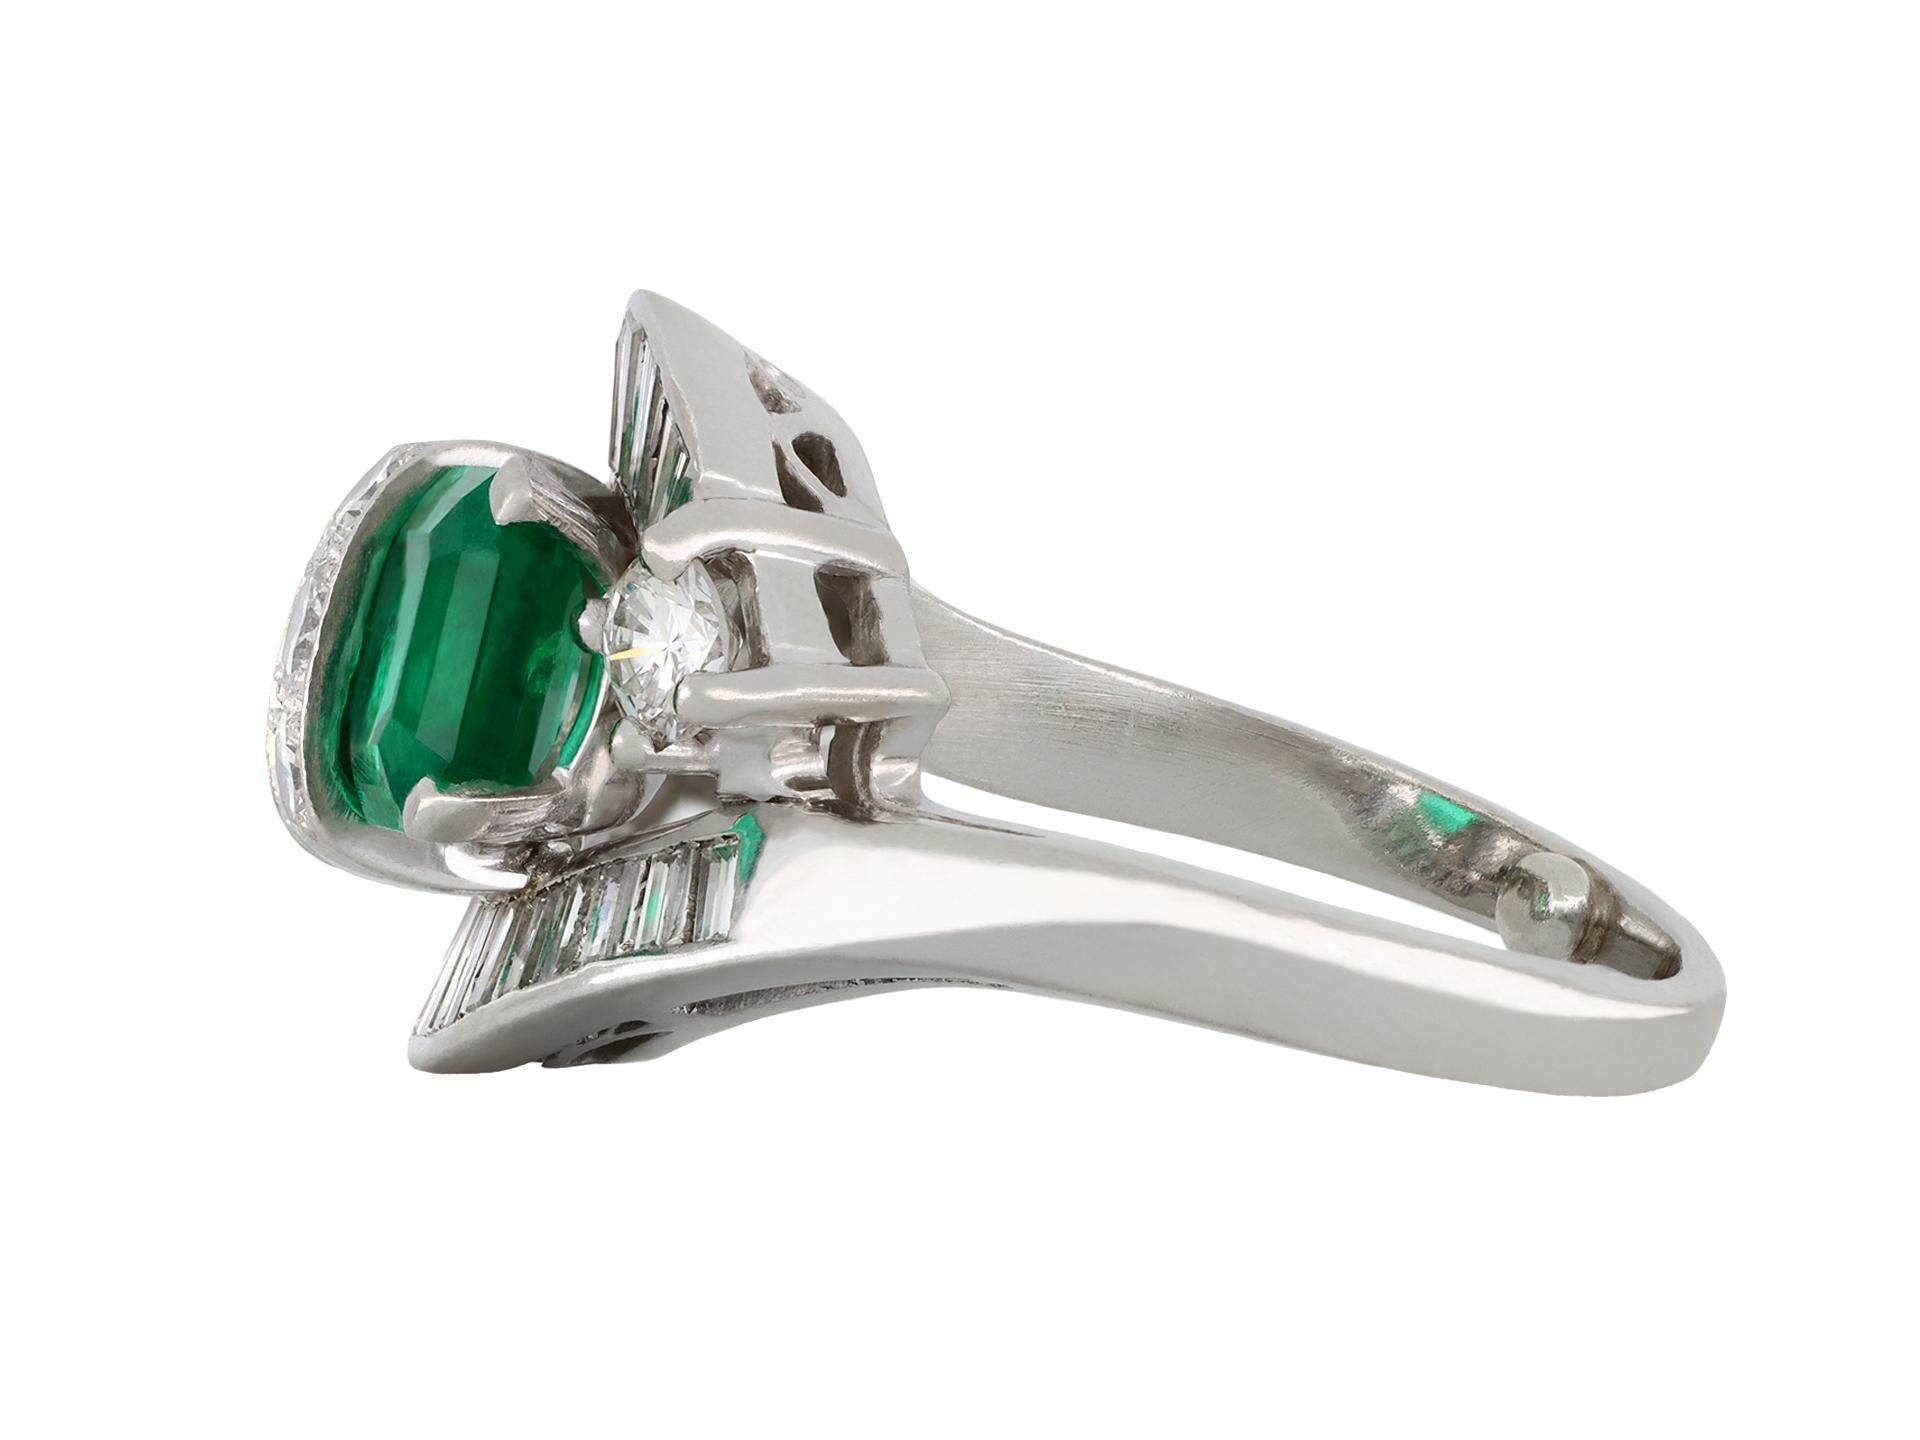 Emerald and diamond crossover ballerina ring, circa 1950. A platinum and iridium ring diagonally set with one rectangular emerald-cut Colombian emerald in a claw setting with an approximate weight of 1.10 carats, and one rectangular emerald-cut